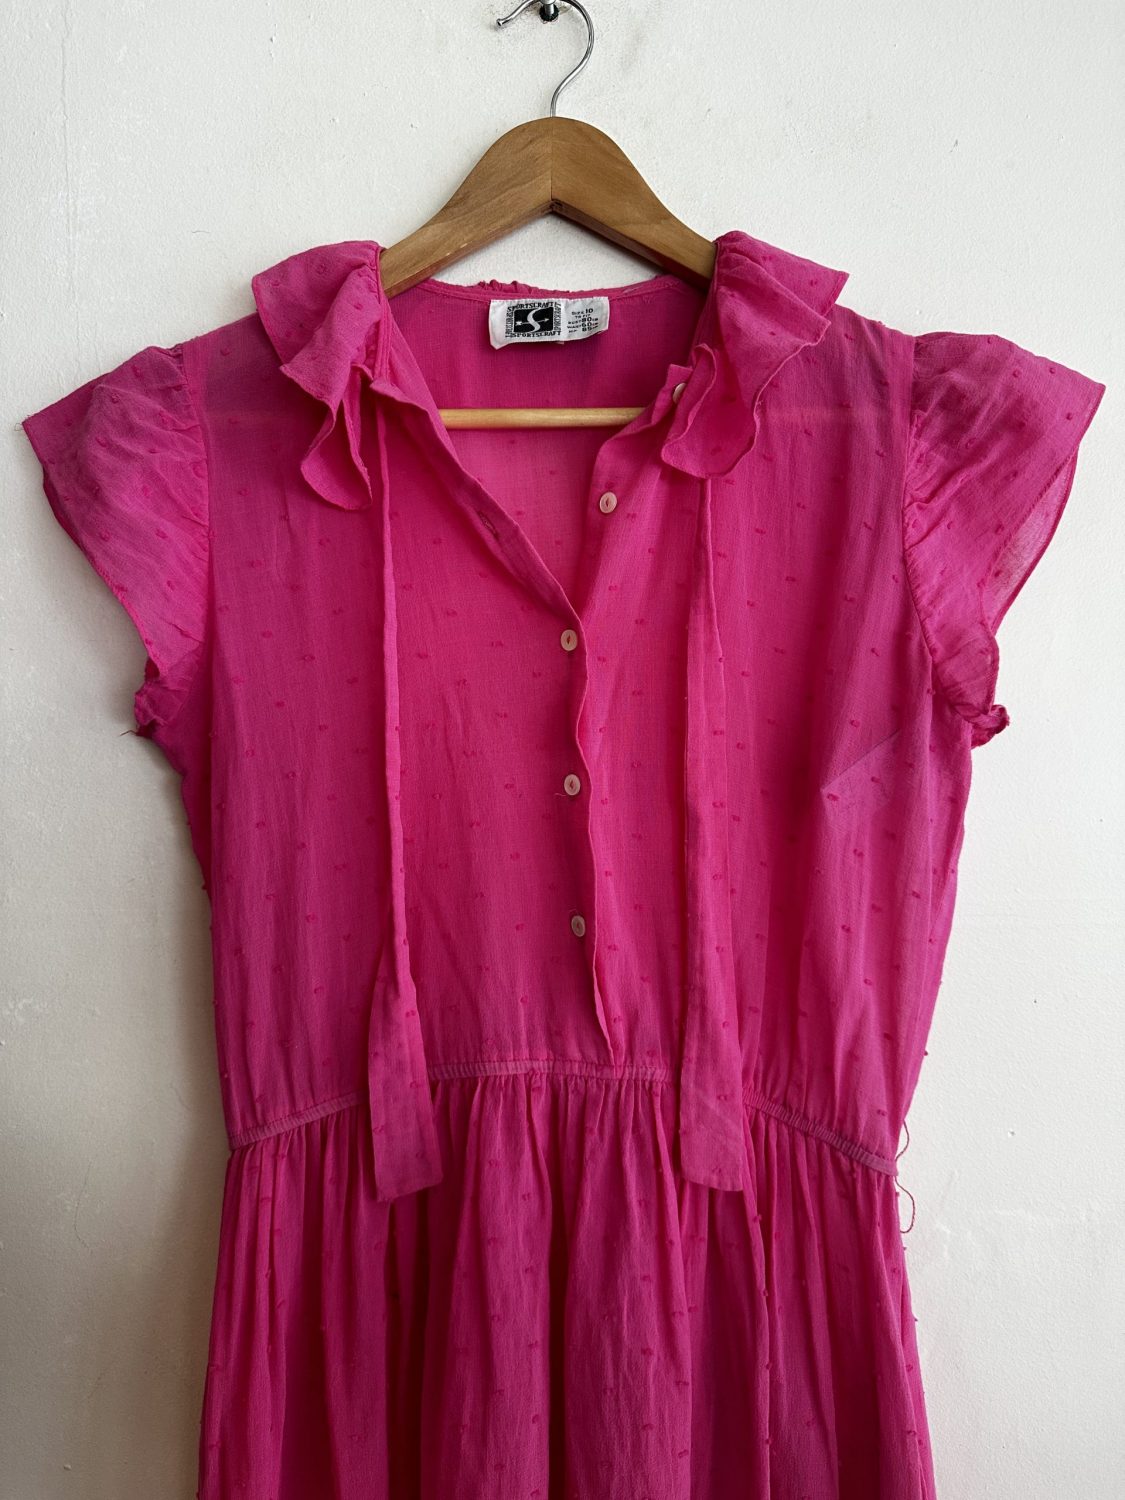 HOT PINK VINTAGE SPORTSCRAFT COTTON DRESS WITH CAPPED SLEEVES | Chaos ...